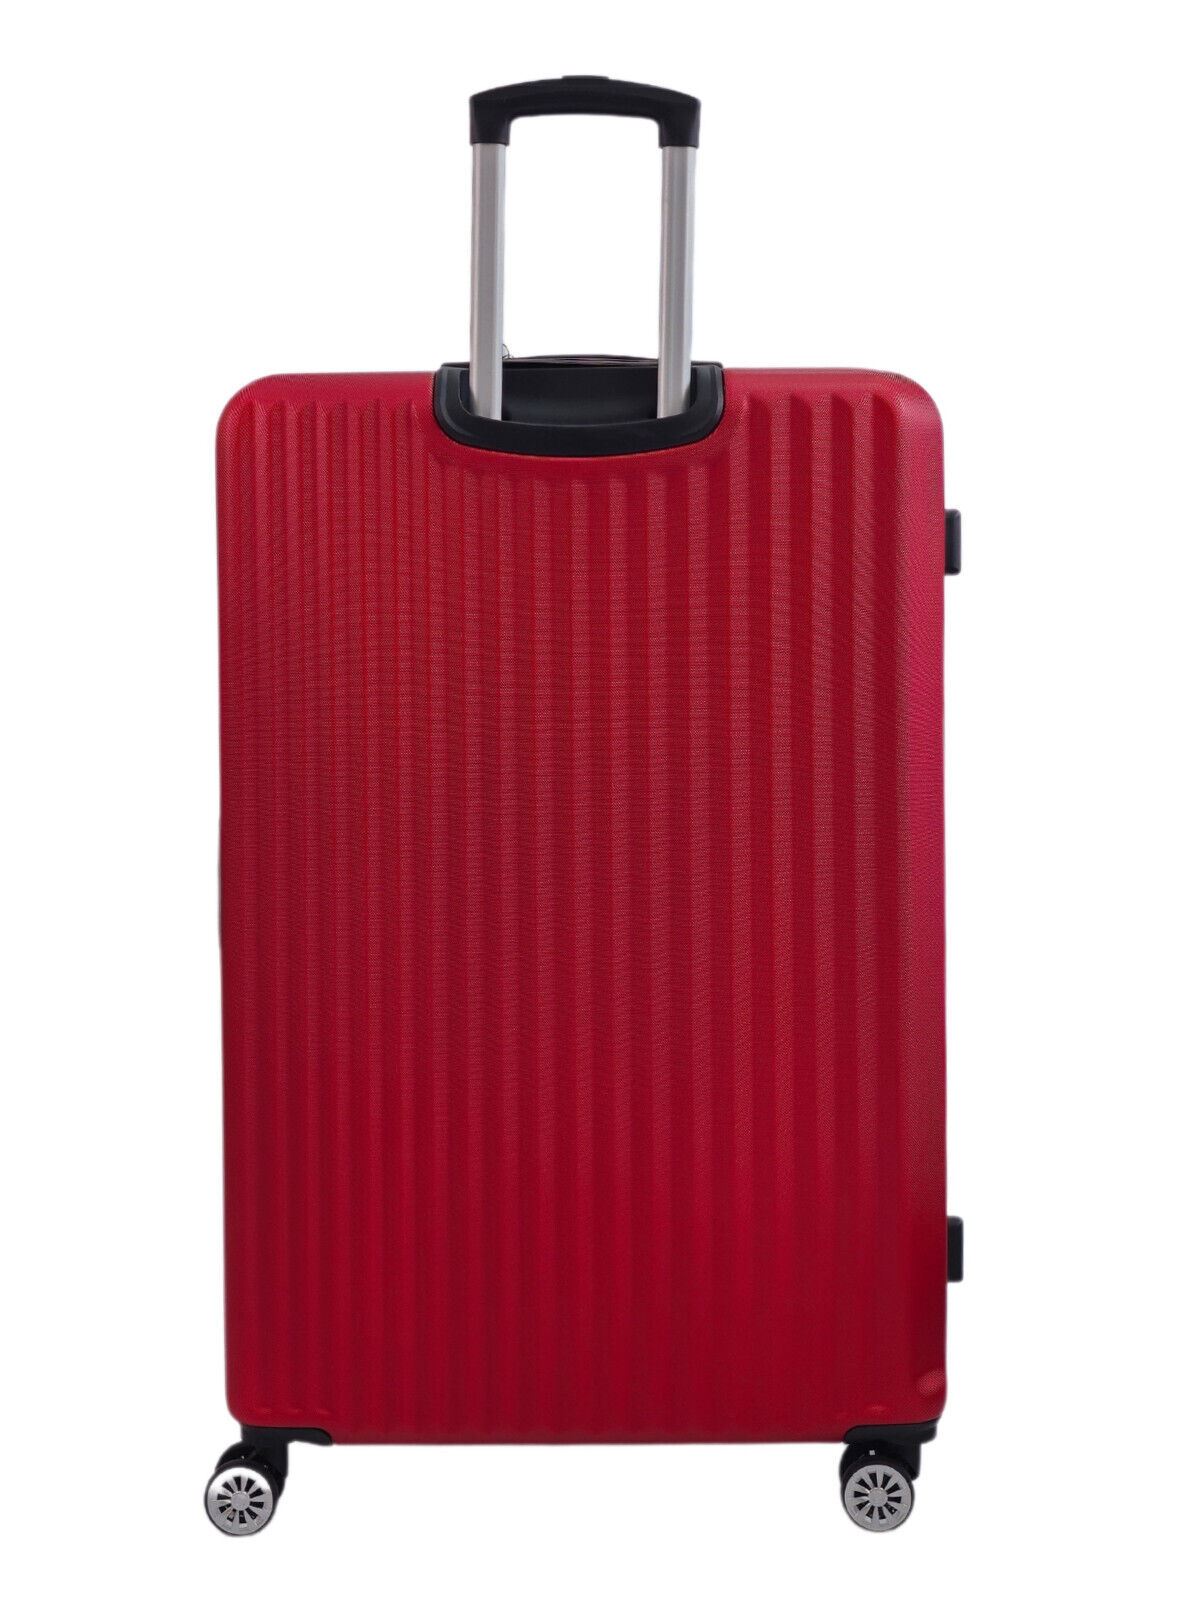 Albertville Extra Large Hard Shell Suitcase in Burgundy